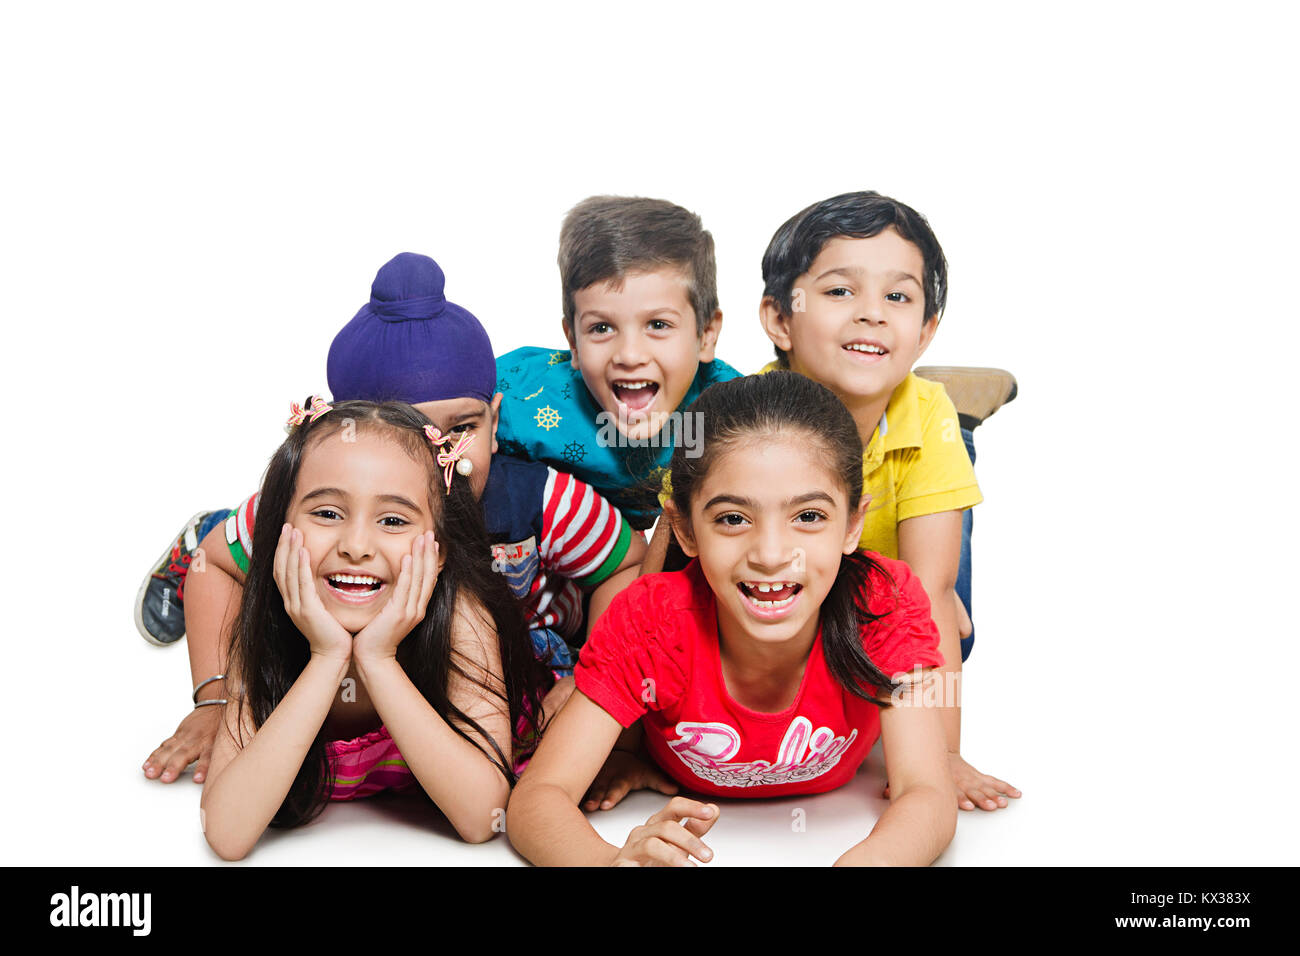 Group Indian Kids Friends Lying Down Together Having Fun Cheerful Stock Photo